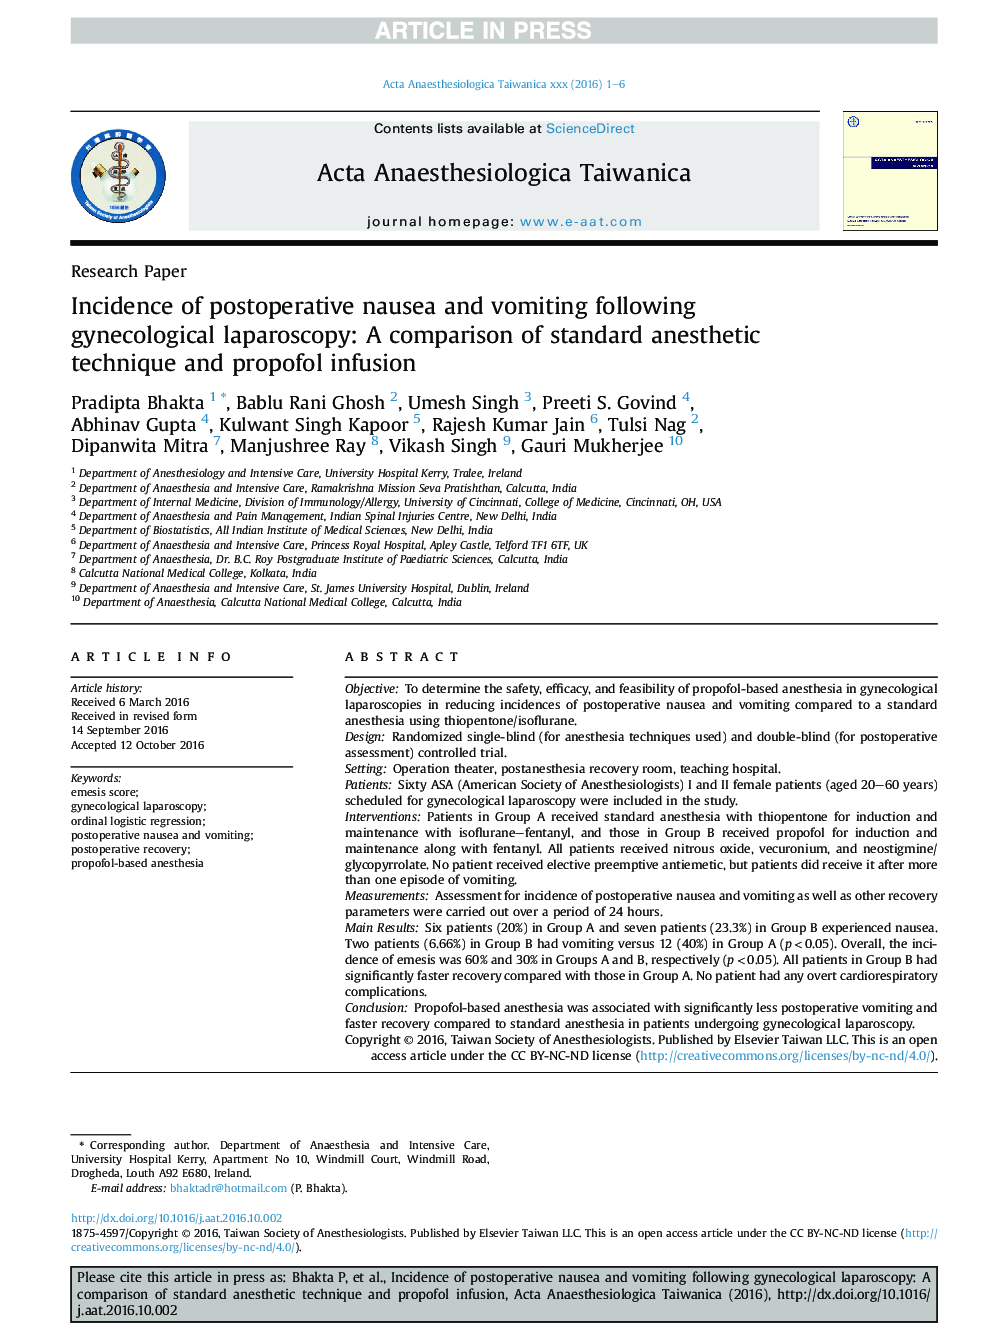 Incidence of postoperative nausea and vomiting following gynecological laparoscopy: A comparison of standard anesthetic technique and propofol infusion